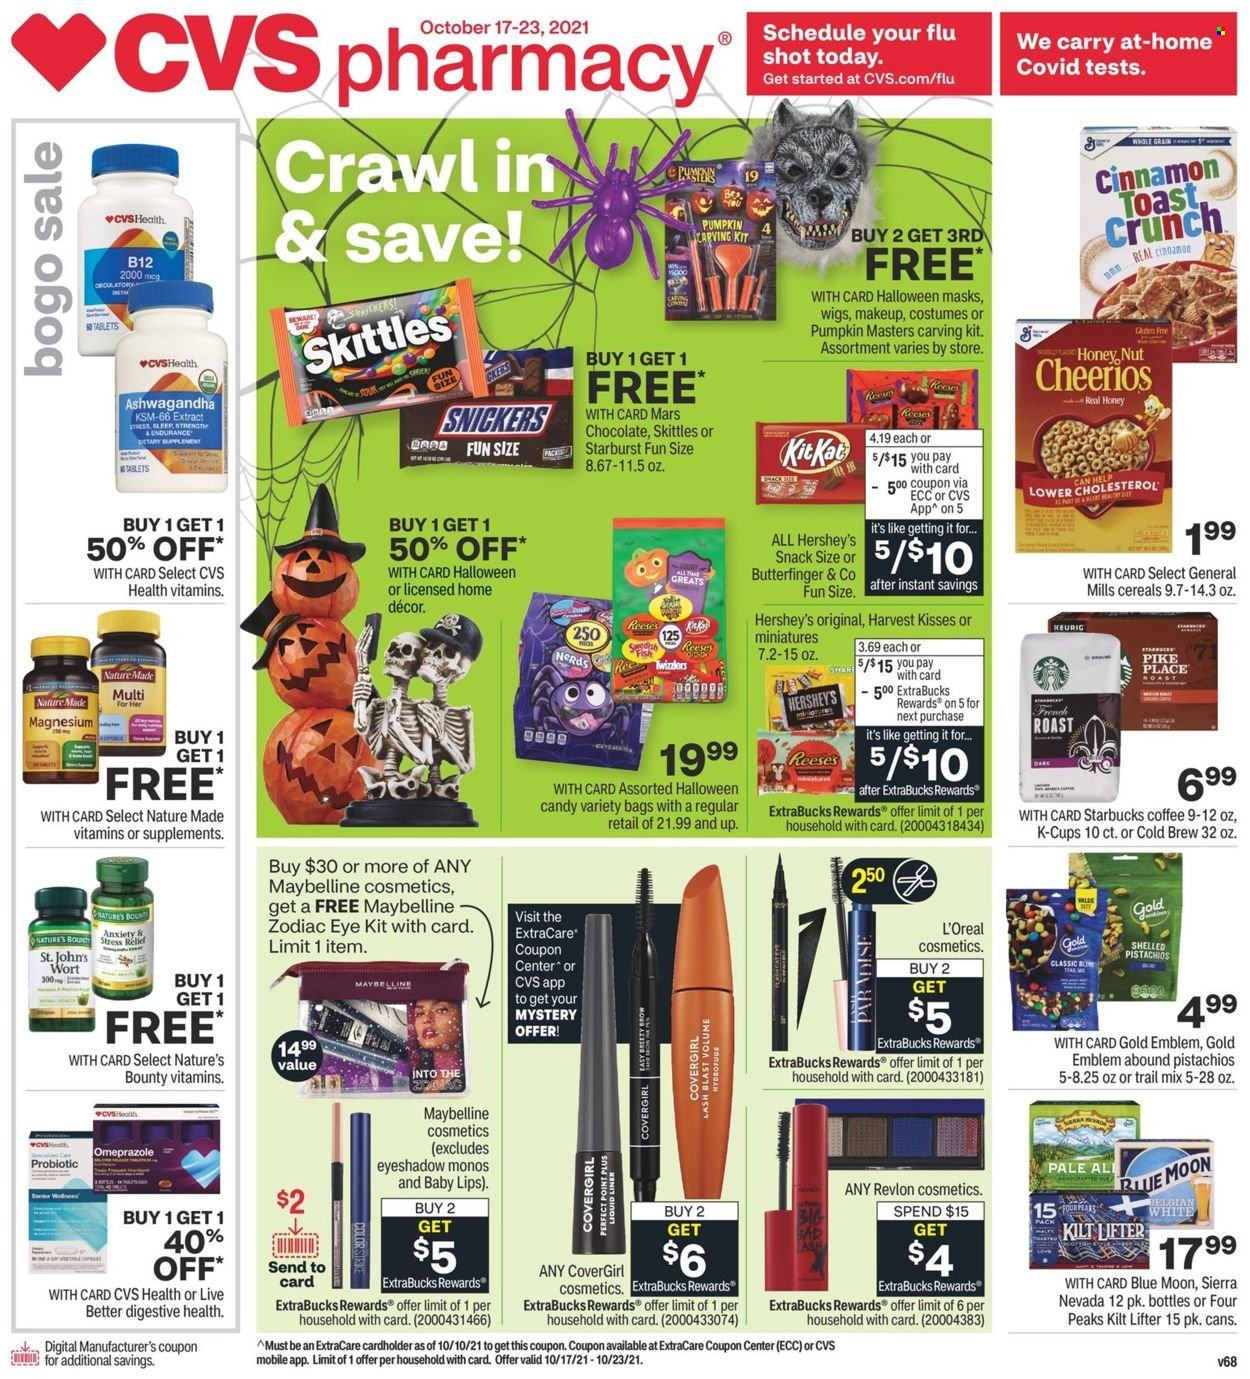 thumbnail - CVS Pharmacy Flyer - 10/17/2021 - 10/23/2021 - Sales products - Reese's, Hershey's, chocolate, snack, Snickers, Mars, KitKat, Skittles, Starburst, pumpkin, cereals, Cheerios, pistachios, trail mix, coffee, Starbucks, coffee capsules, K-Cups, Keurig, L’Oréal, Revlon, Maybelline, costume, Halloween, magnesium, Nature Made, beer, eyeshadow, makeup, Blue Moon. Page 1.